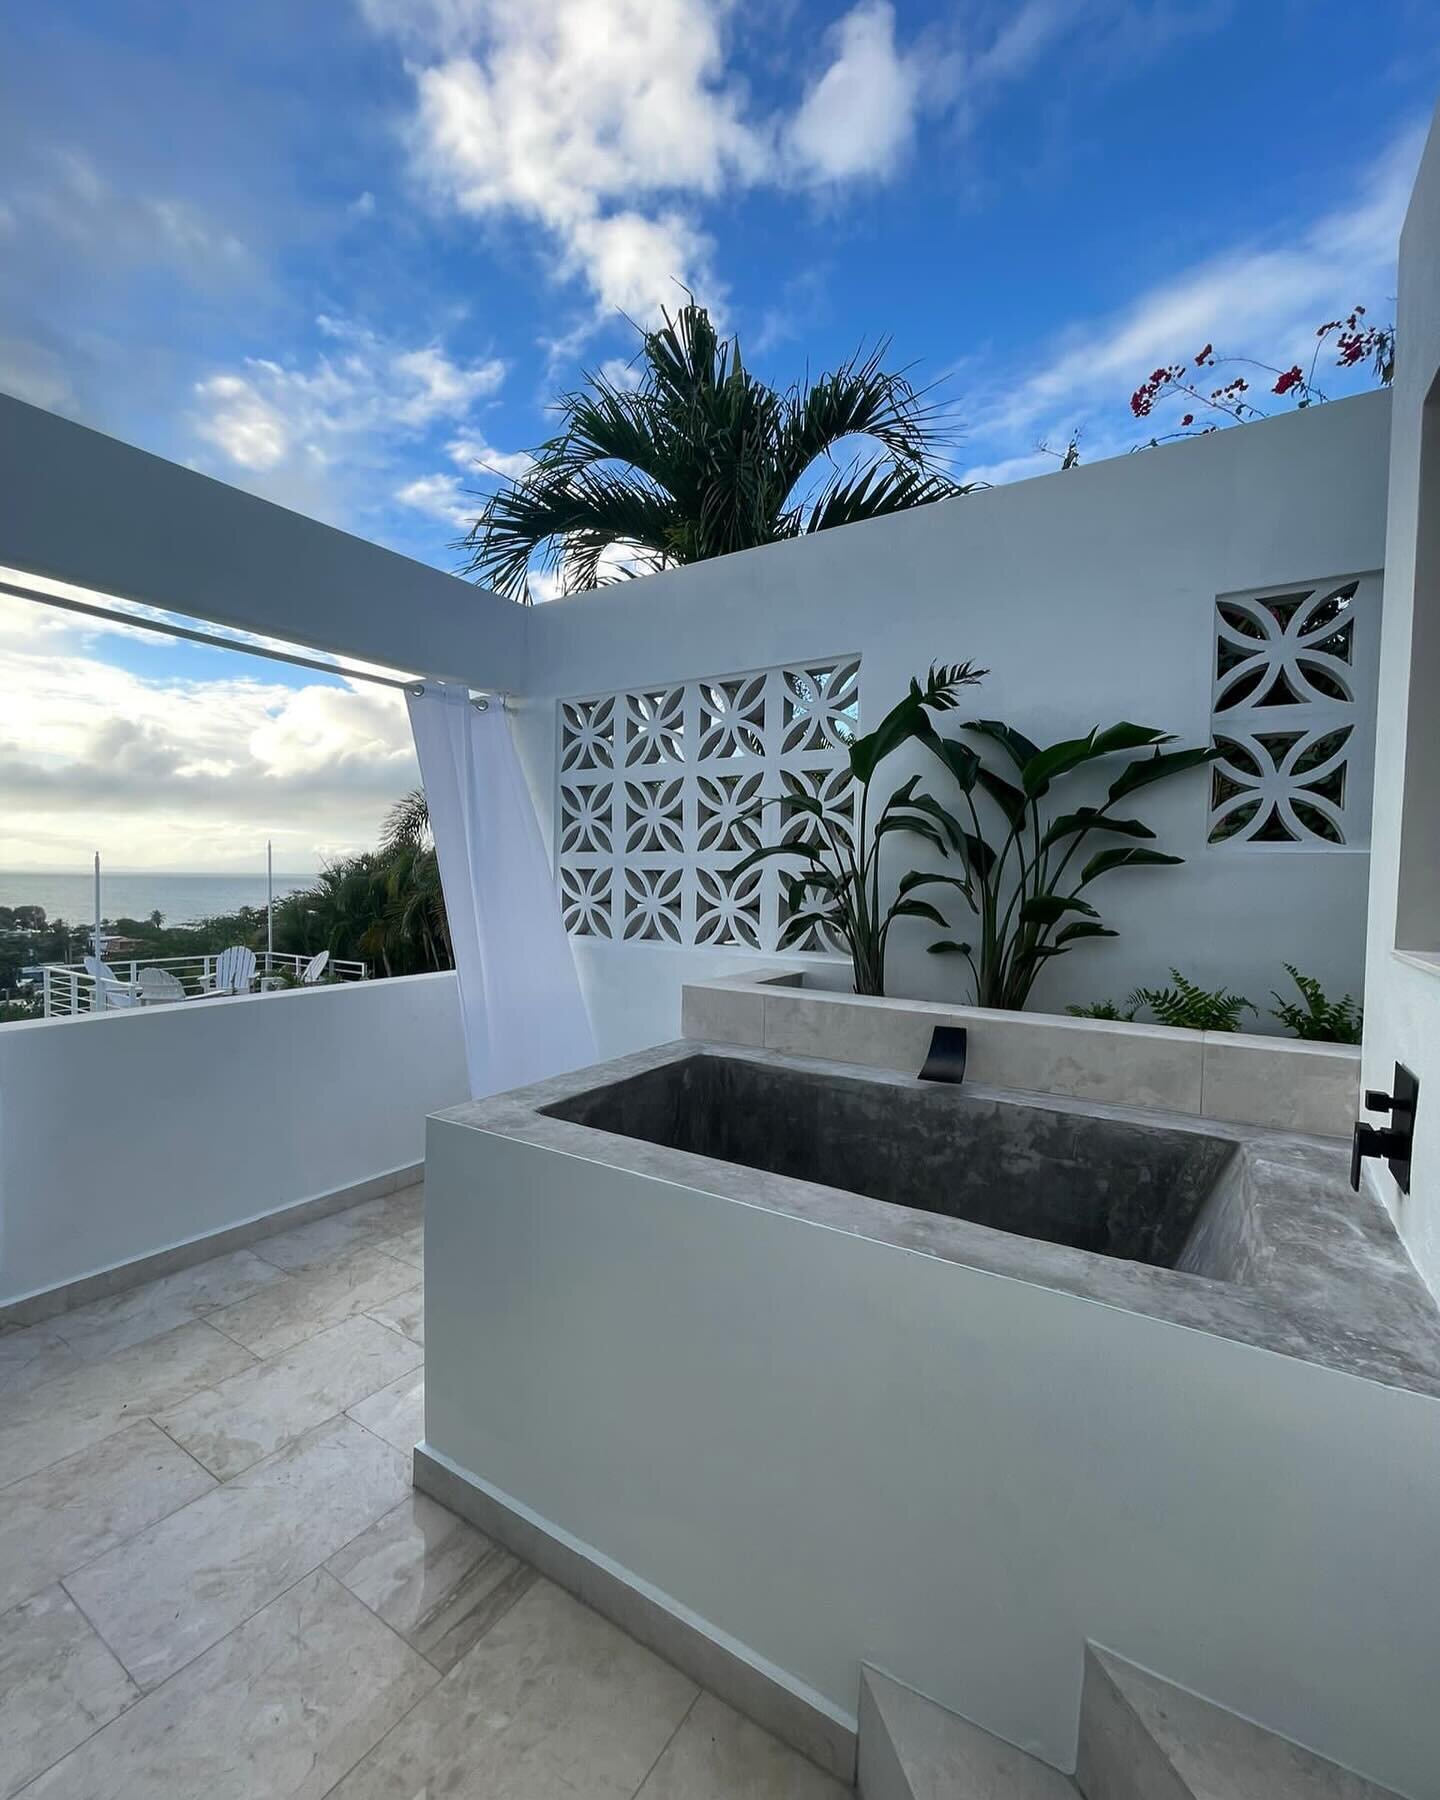 Did I forget to show you the tub? Soak and soak in the view. It&rsquo;s a great place to chill.